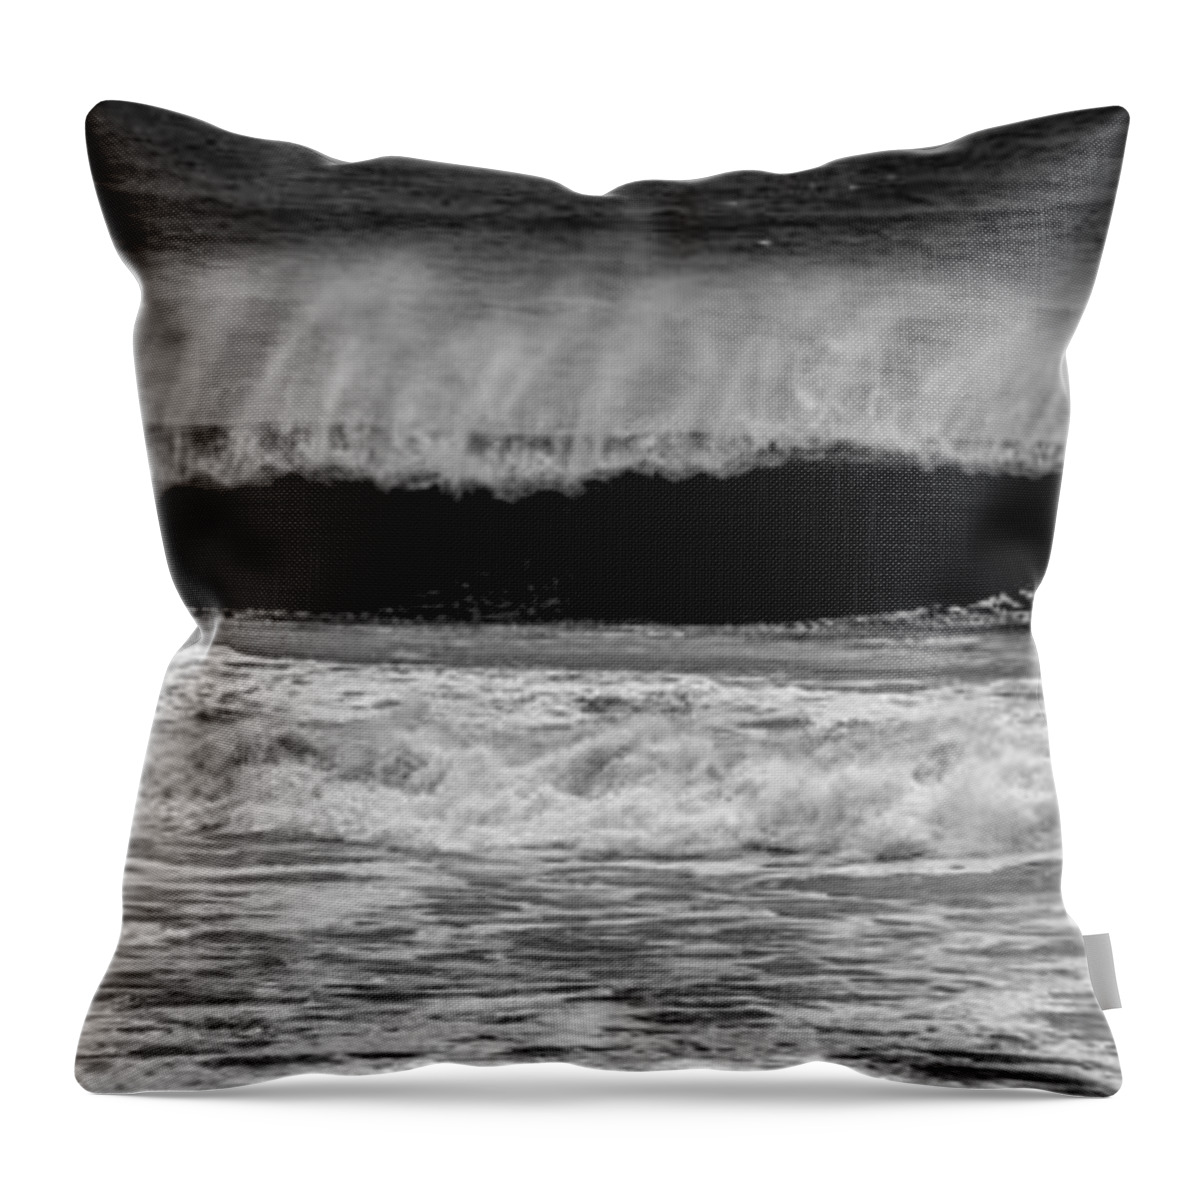 Surf Throw Pillow featuring the photograph Surf Dude by Nigel R Bell